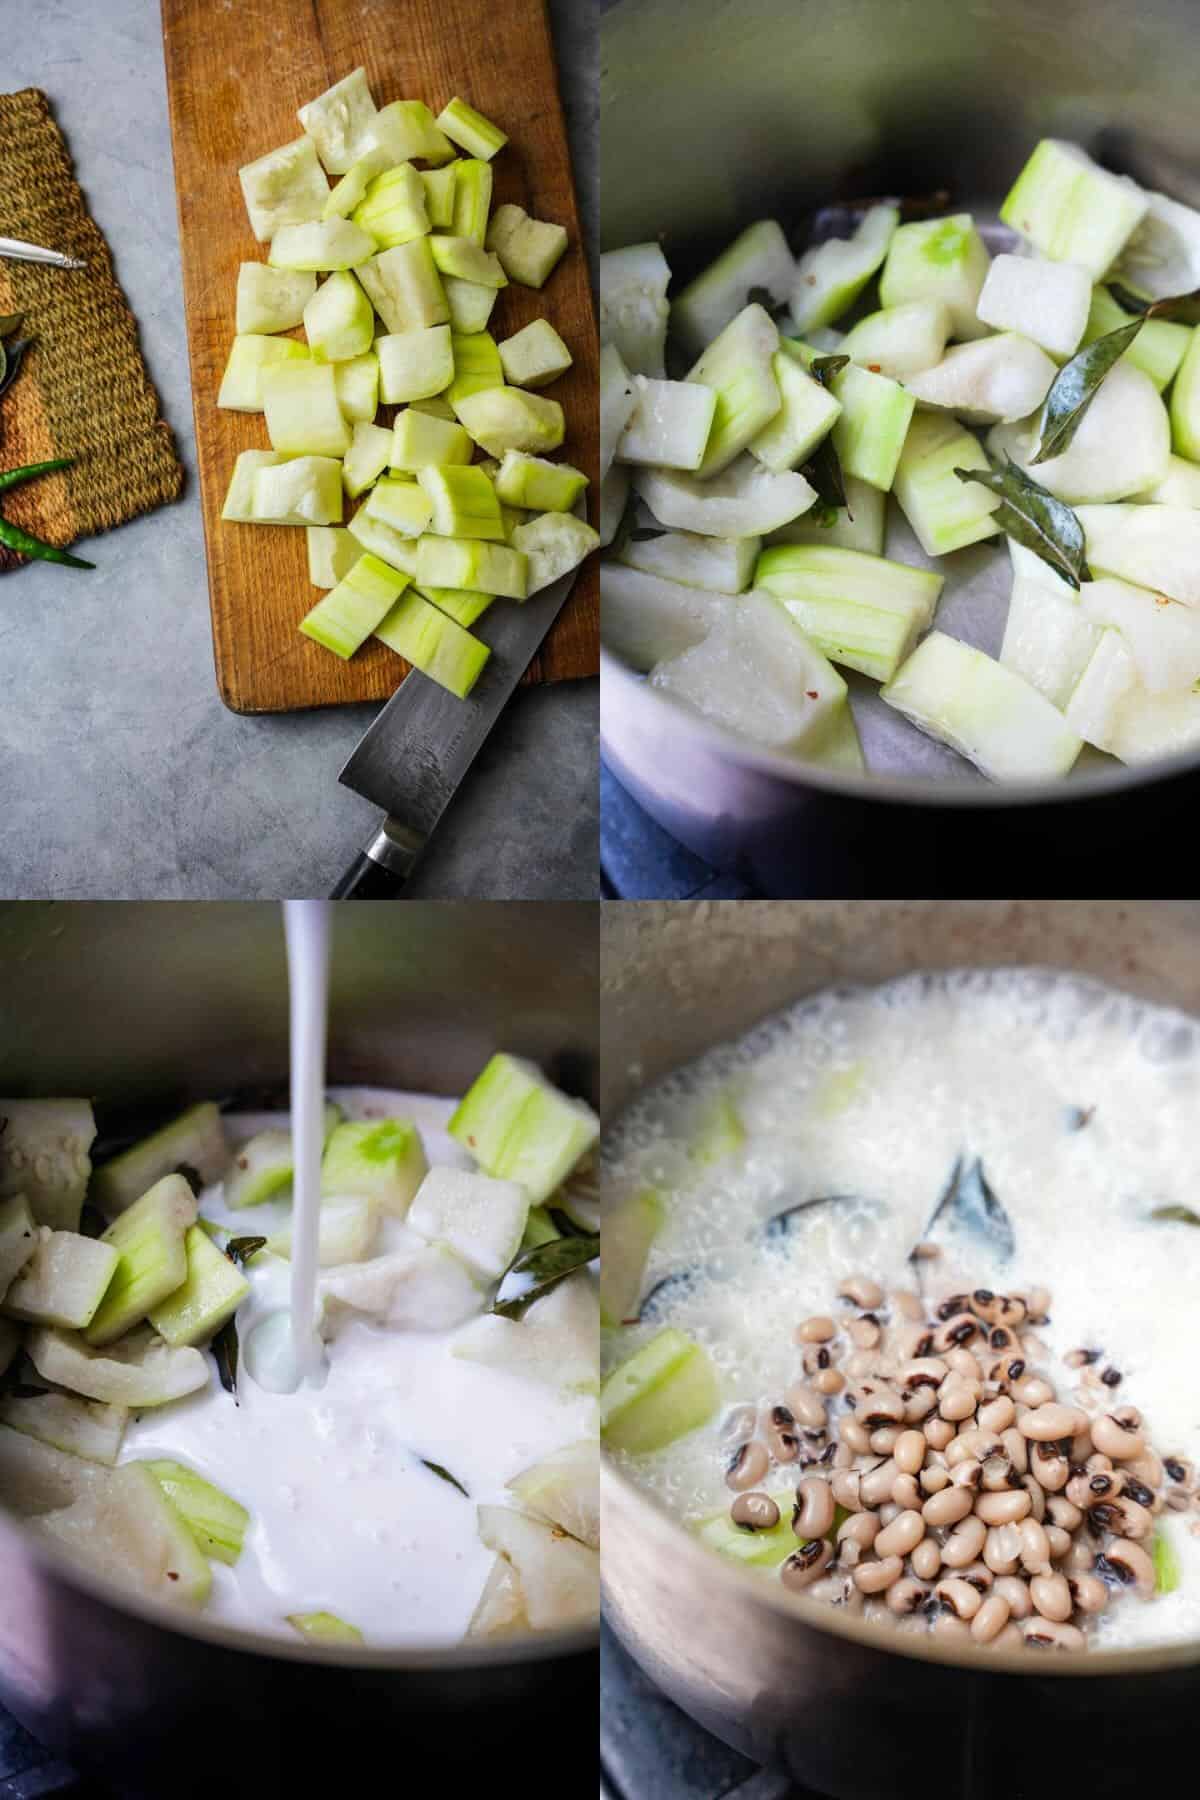 A series of photos showing the process of making Olan, a traditional Indian dish. Gourd getting cut, cooked and coconut milk and then cooked pigeon peas are added.